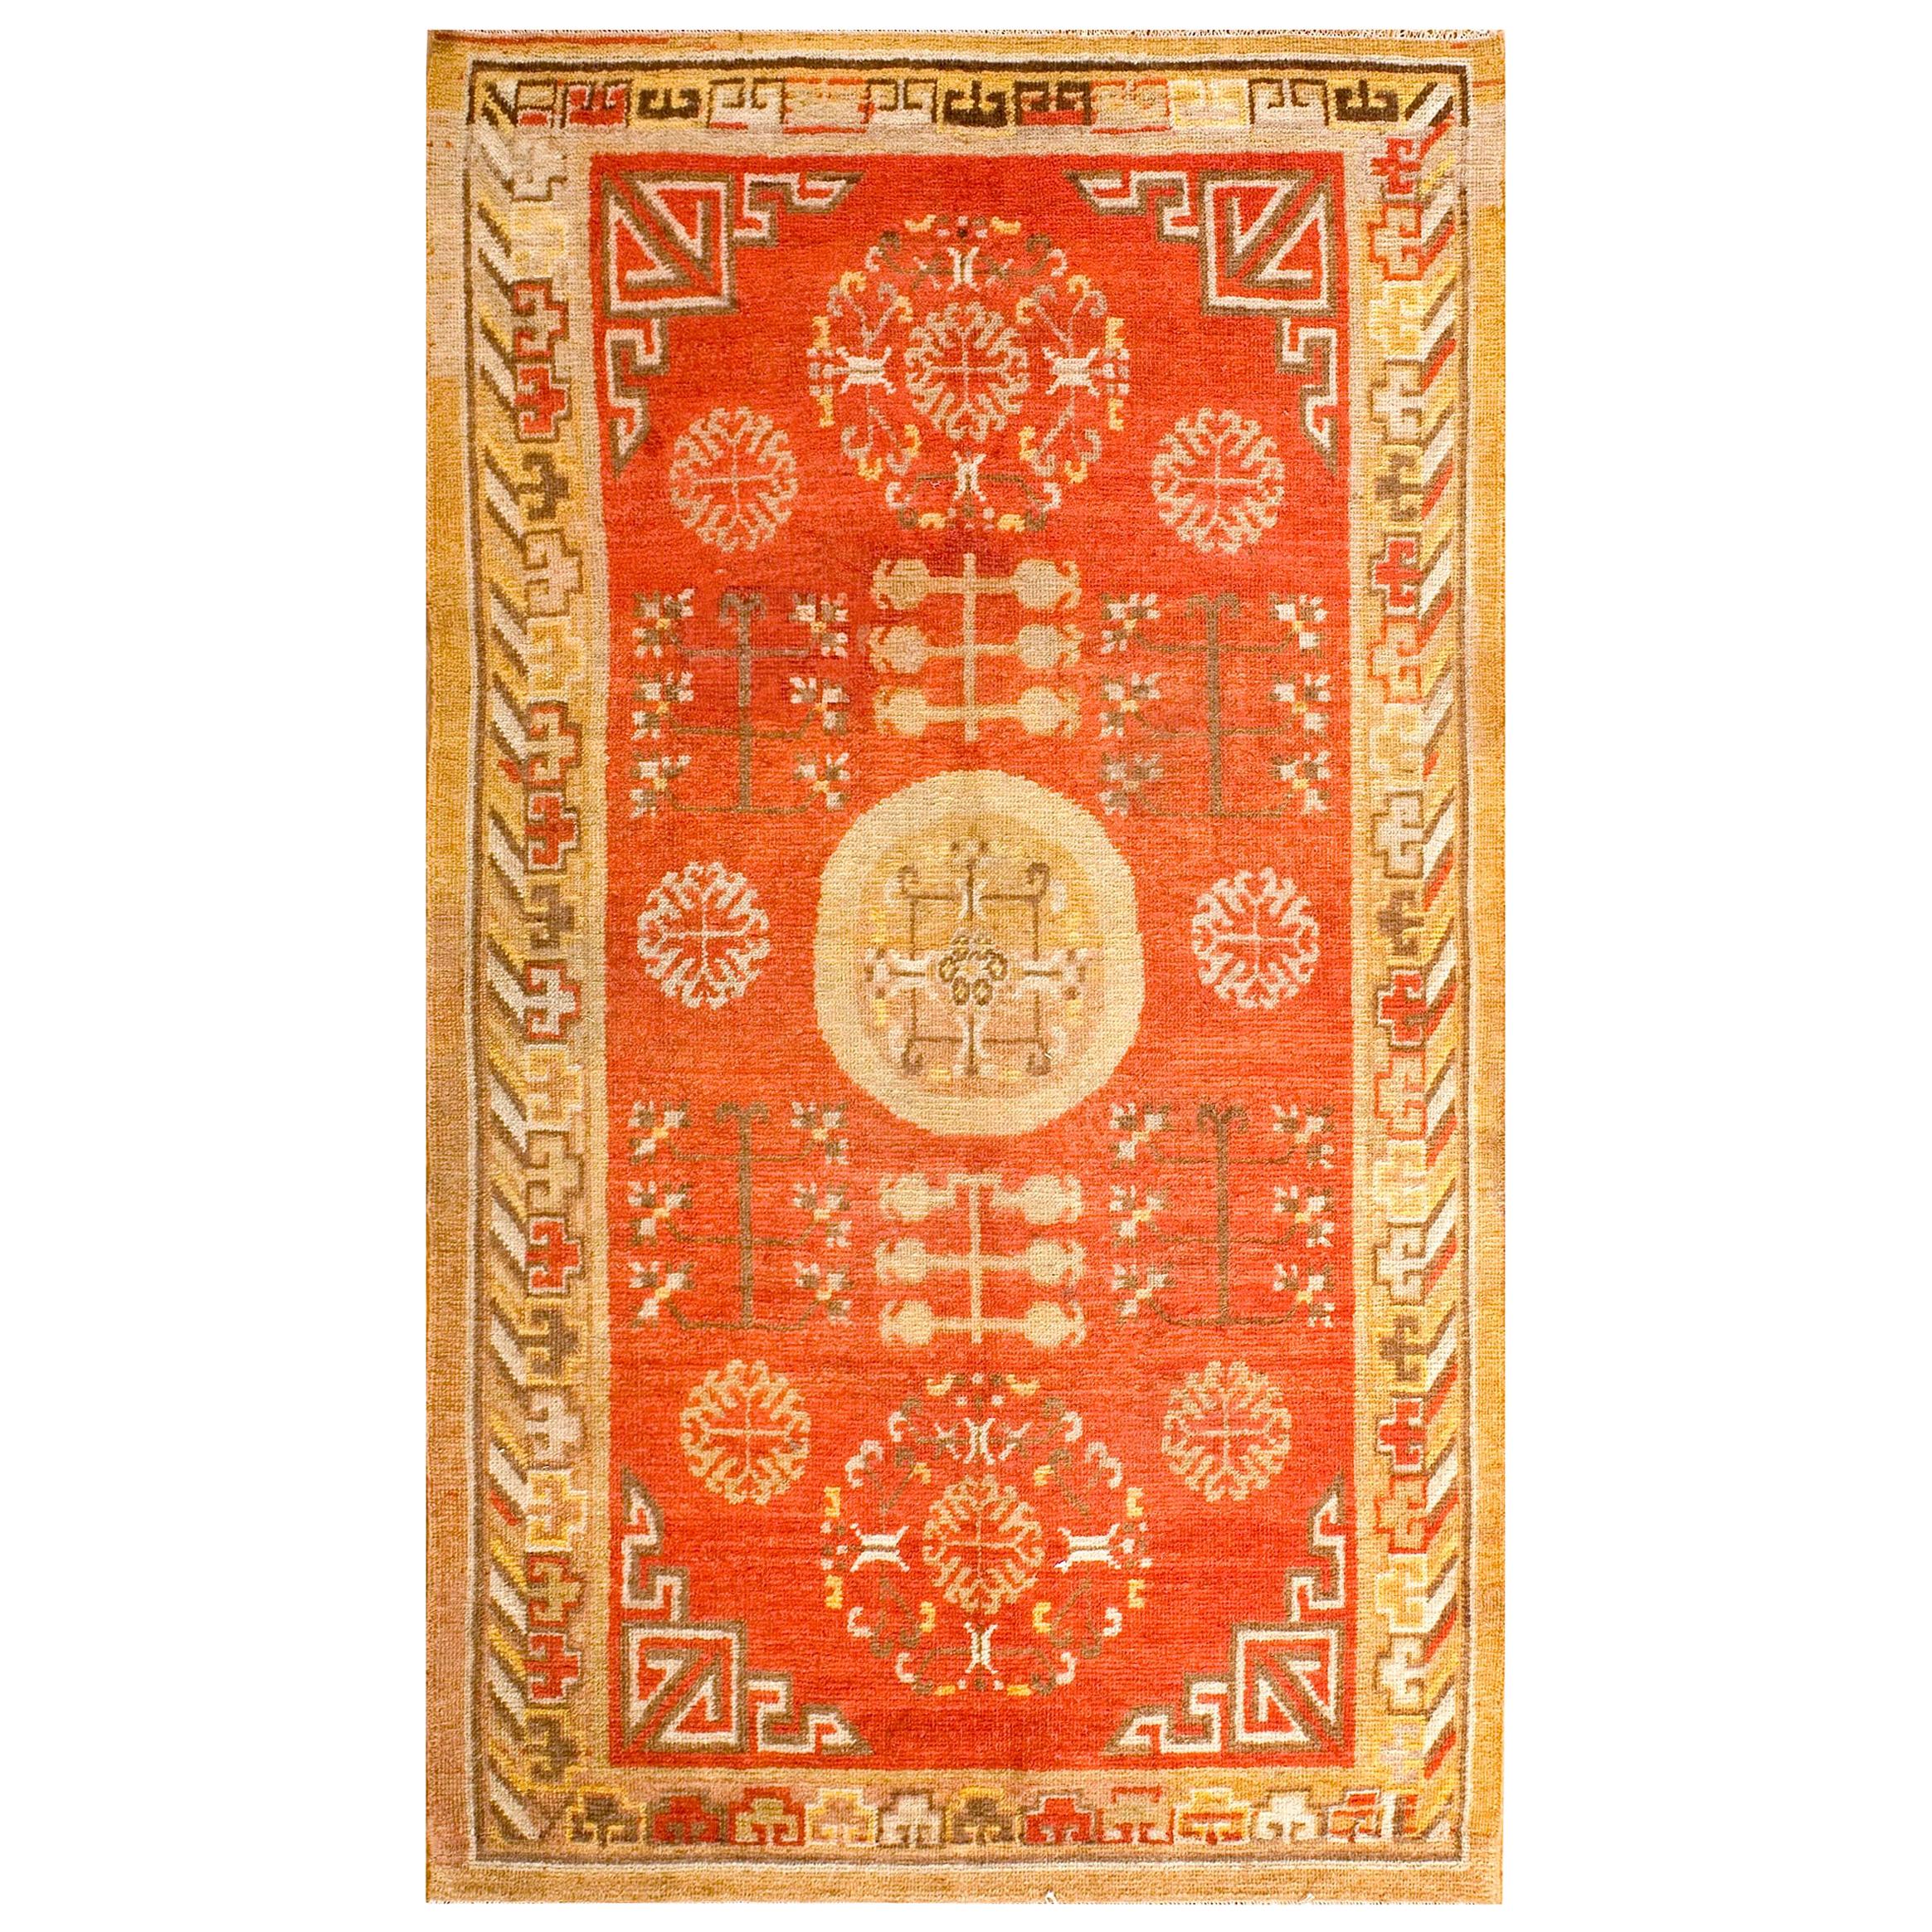 Early 20th Century Central Asian Chinese Khotan Carpet ( 4' x 7' - 122 x 213 ) For Sale